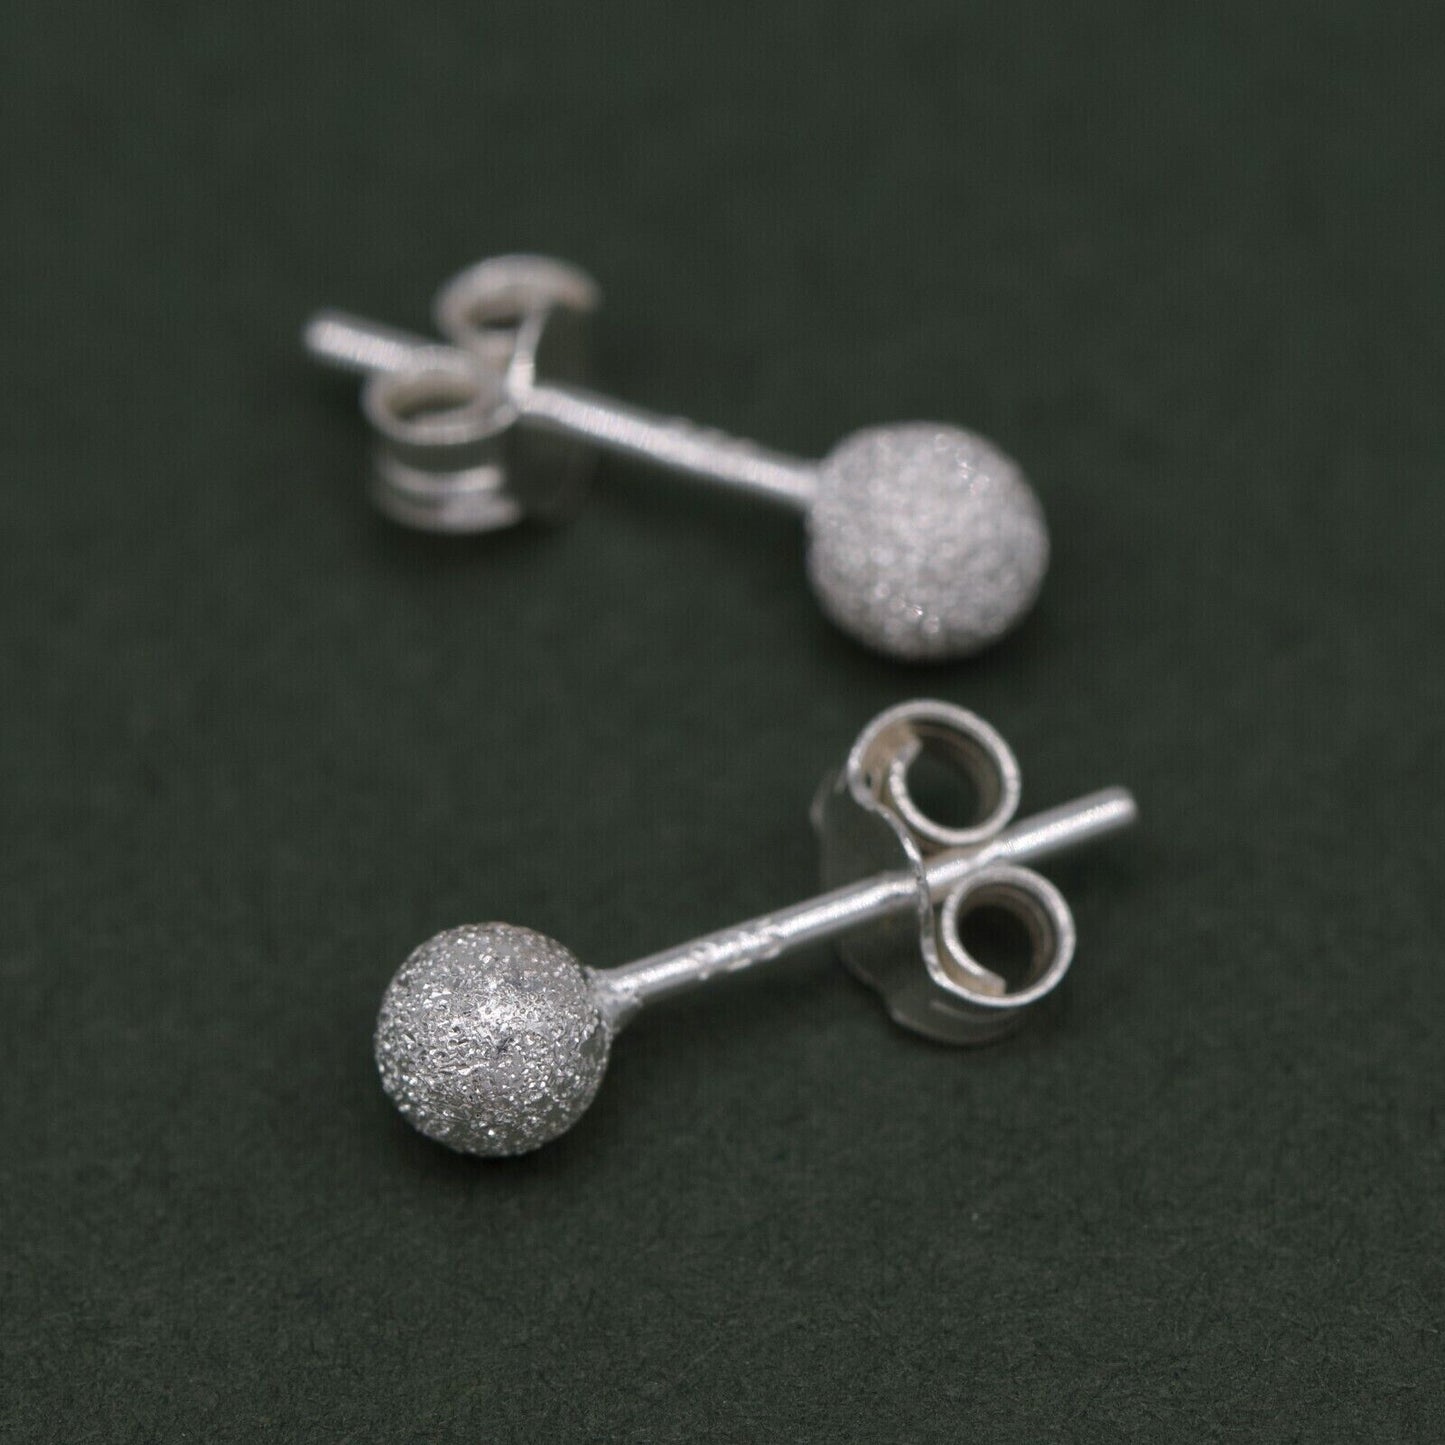 Genuine 925 Sterling Silver 4mm Frosted Ball Studs/Earrings